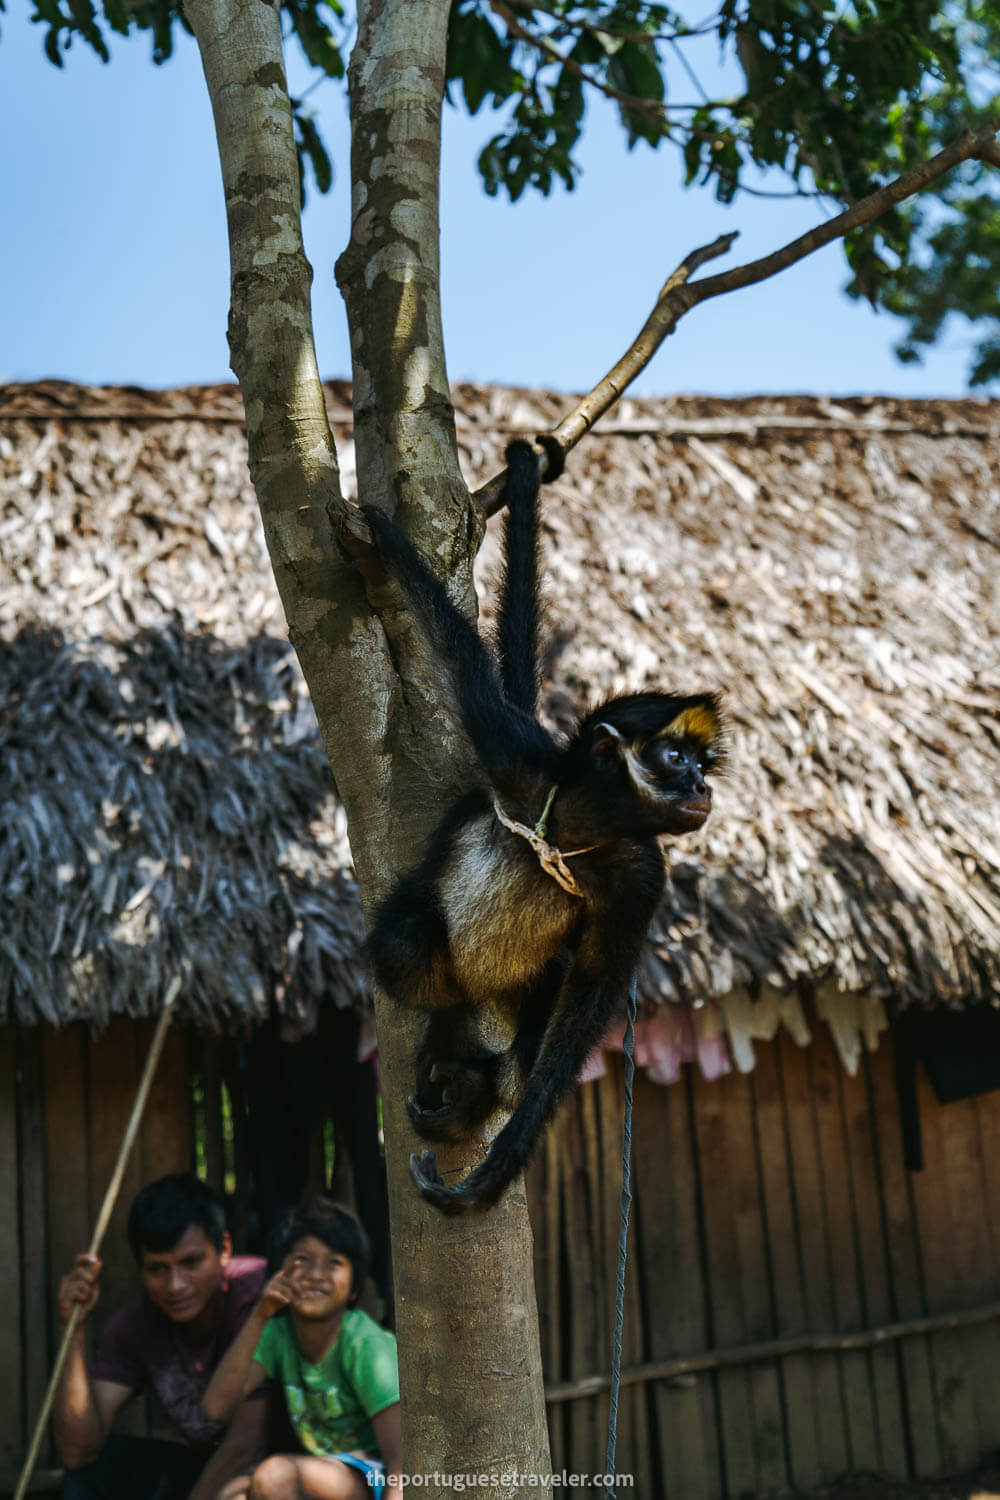 Pancho the spider monkey